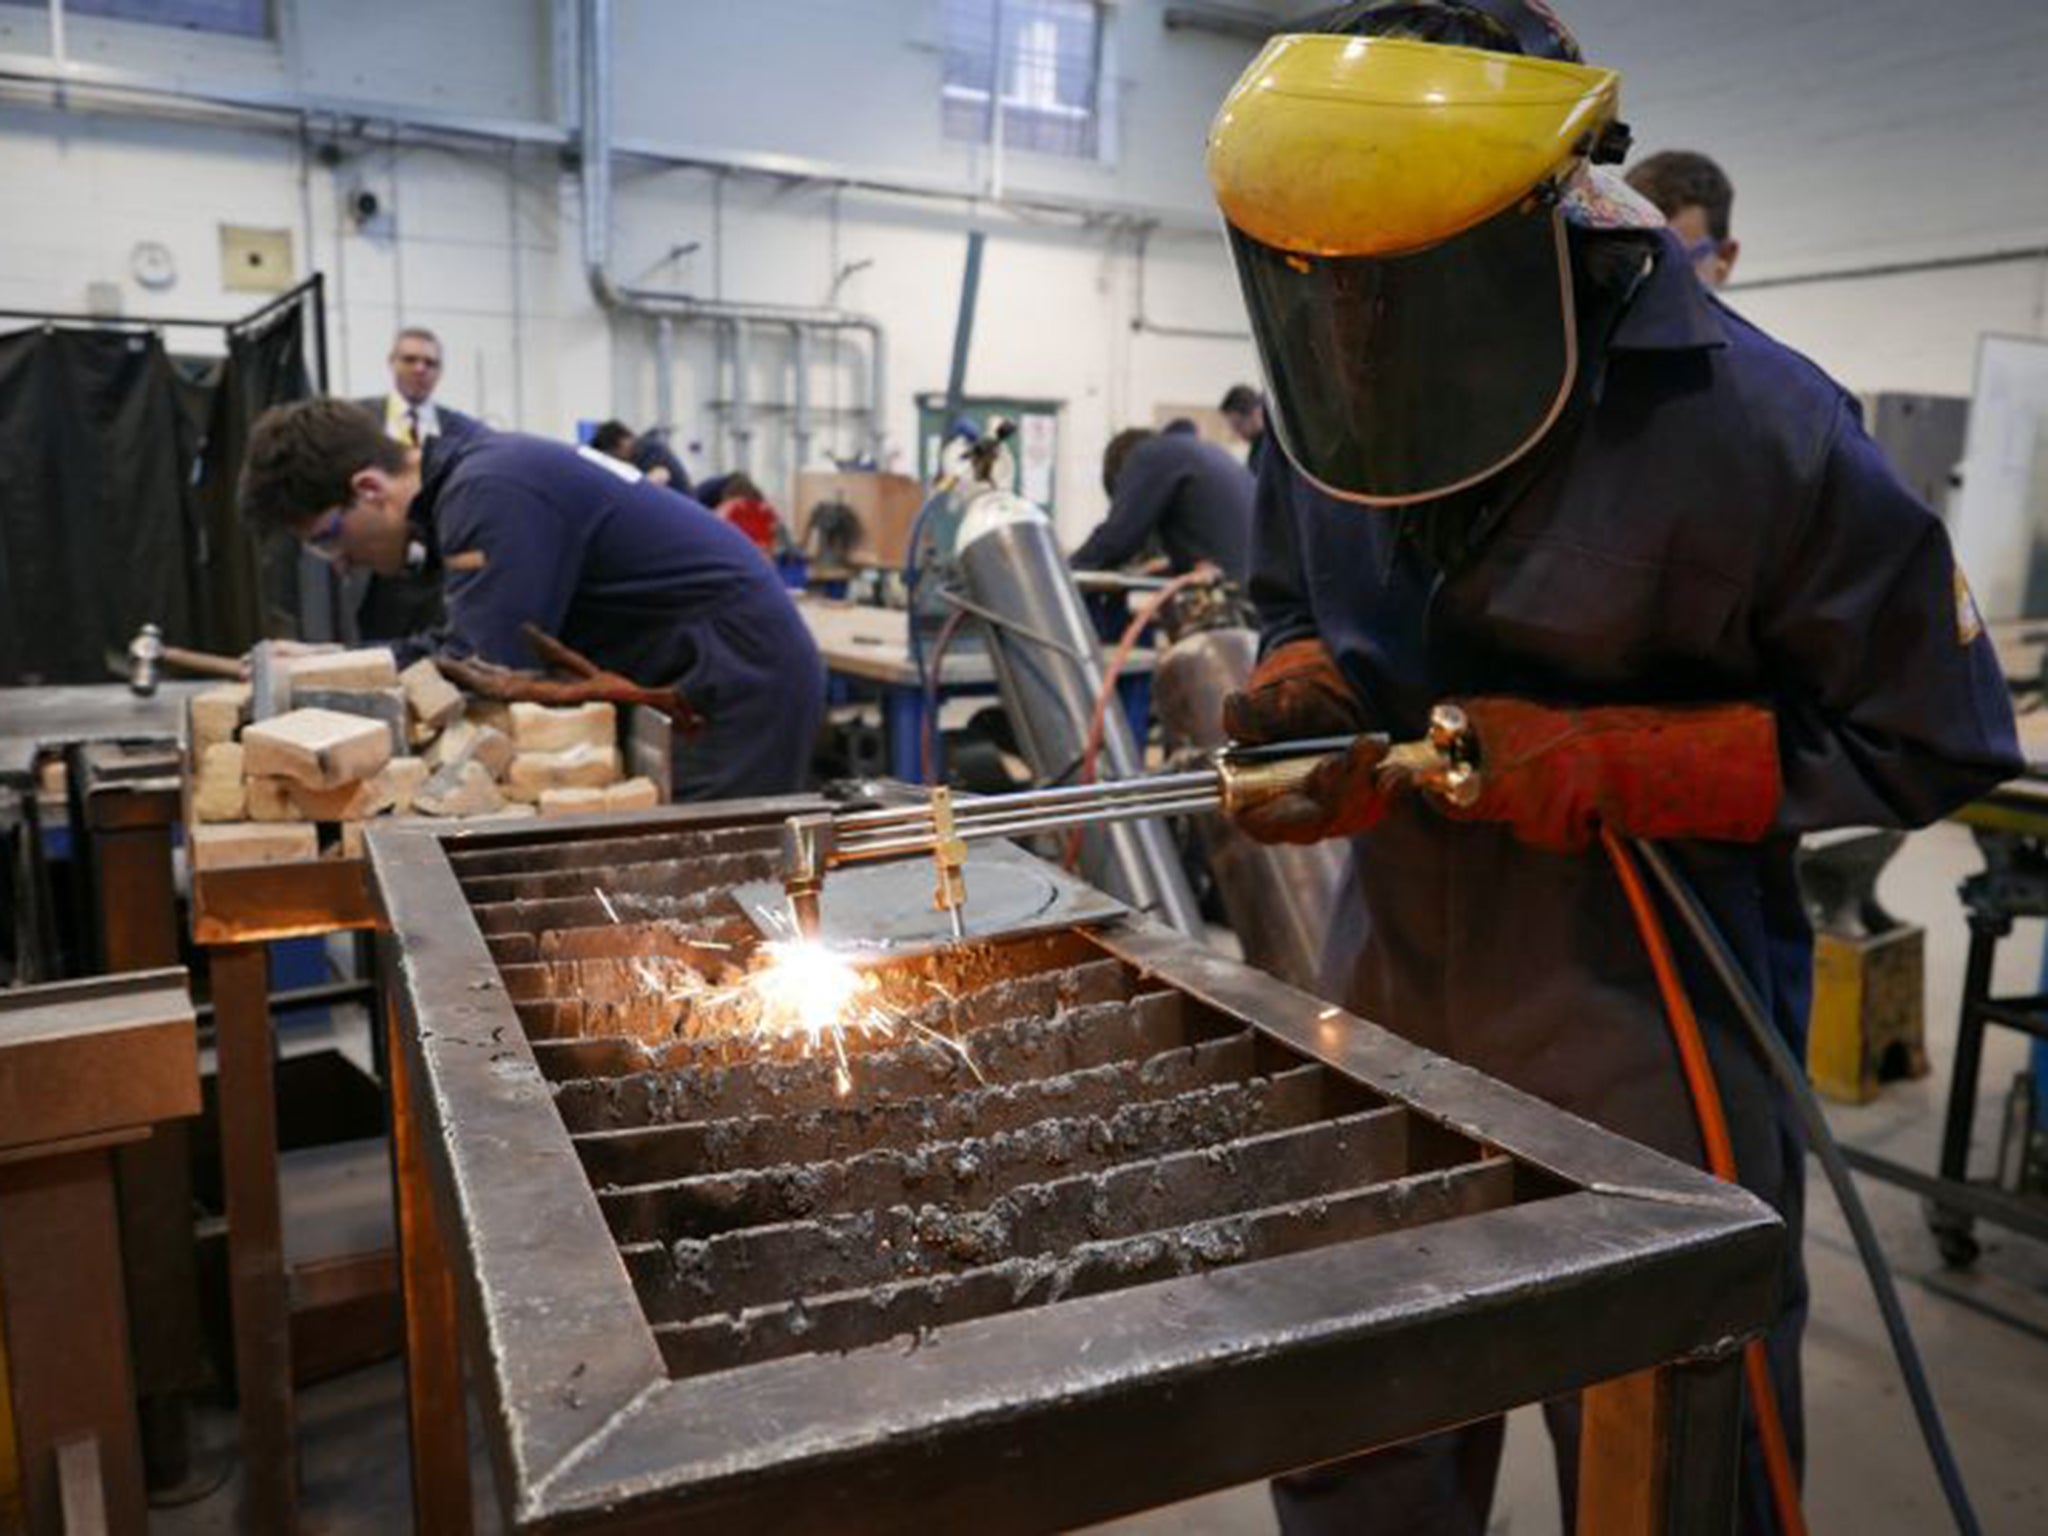 South Tyneside College has a fabricated factory workshop which mimics working in the manufacturing or engineering industry